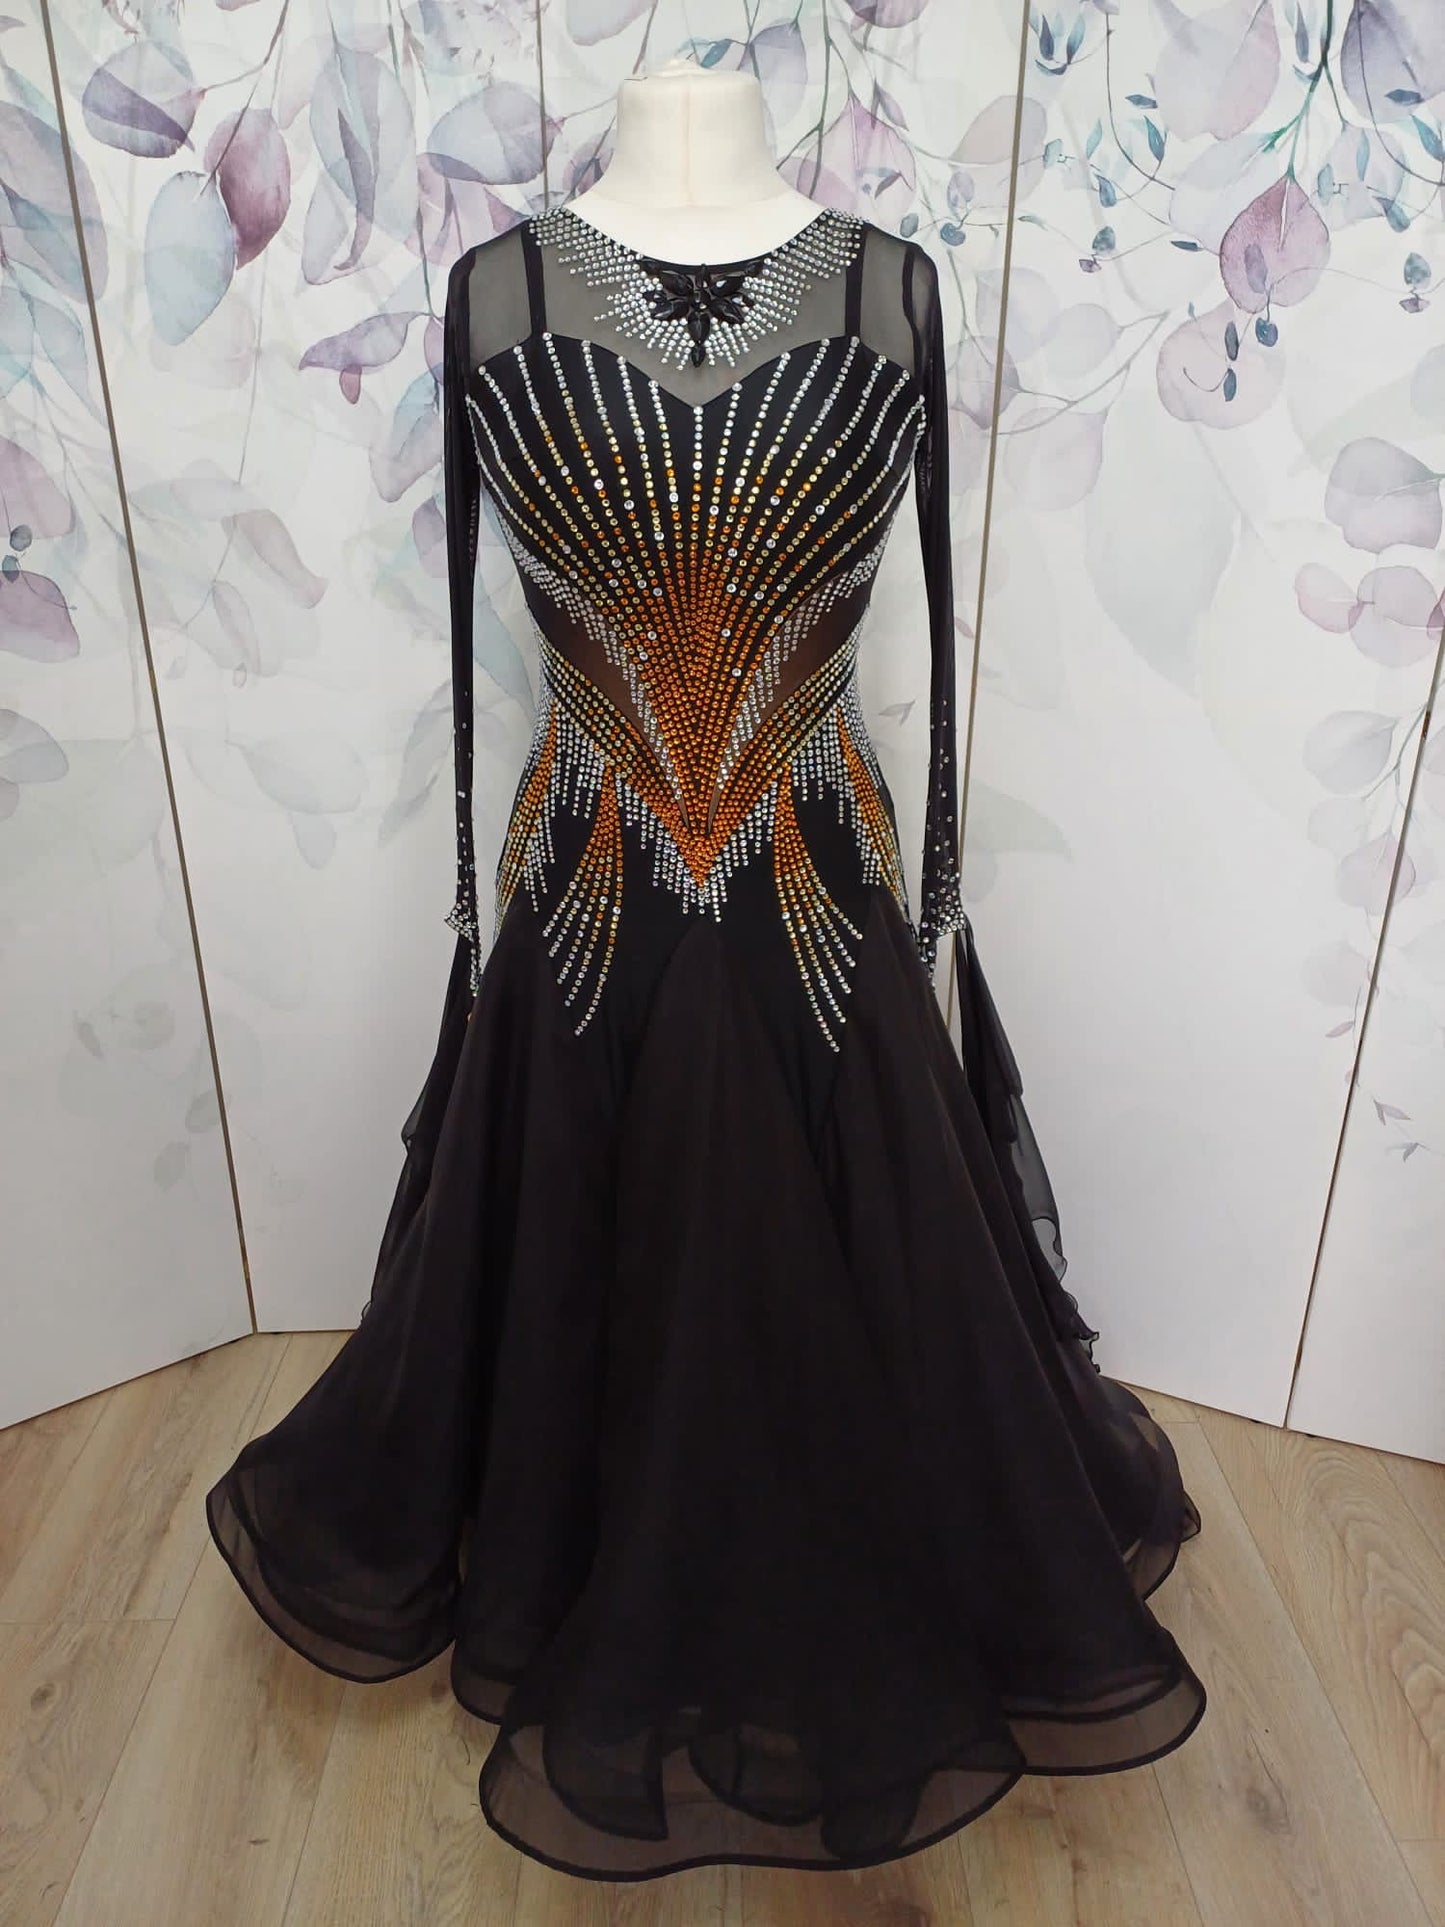 0013 Black Ballroom Dance Dress. Stoned in AB & Topaz. Detachable floats with optional ostrich feather cuffs.